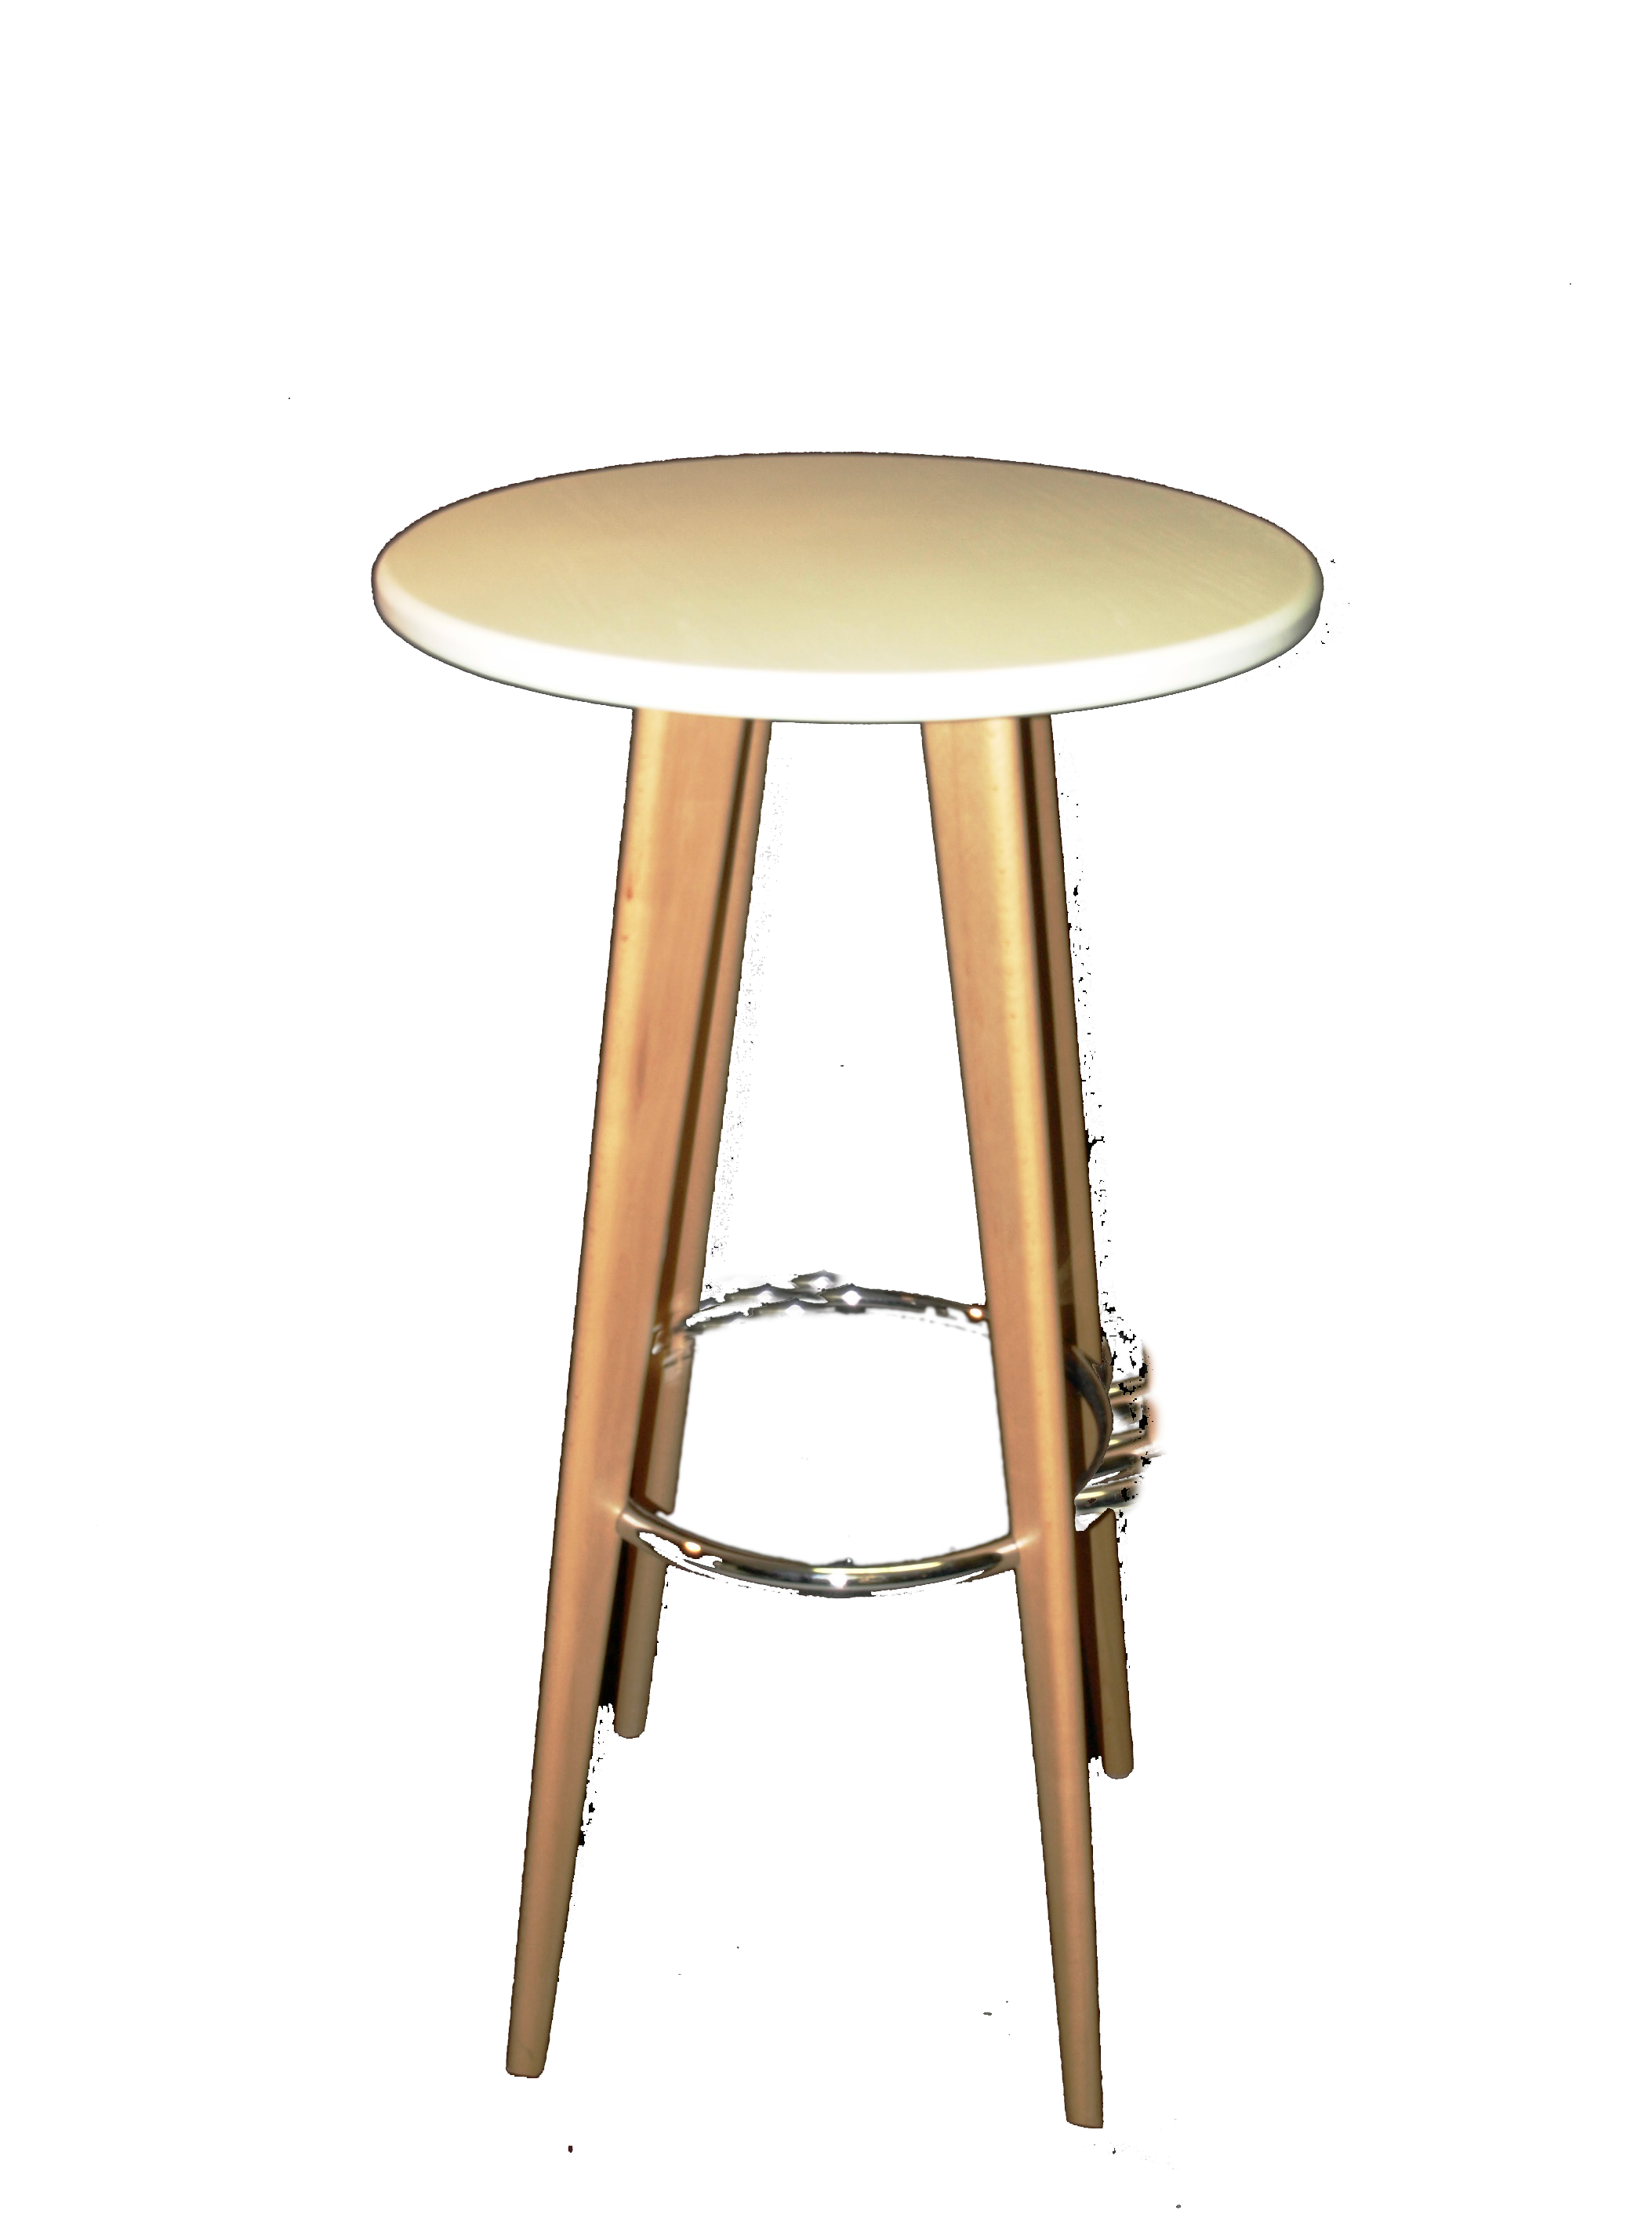 White Wooden High Table, Round Bar Table Hire Perth Australia